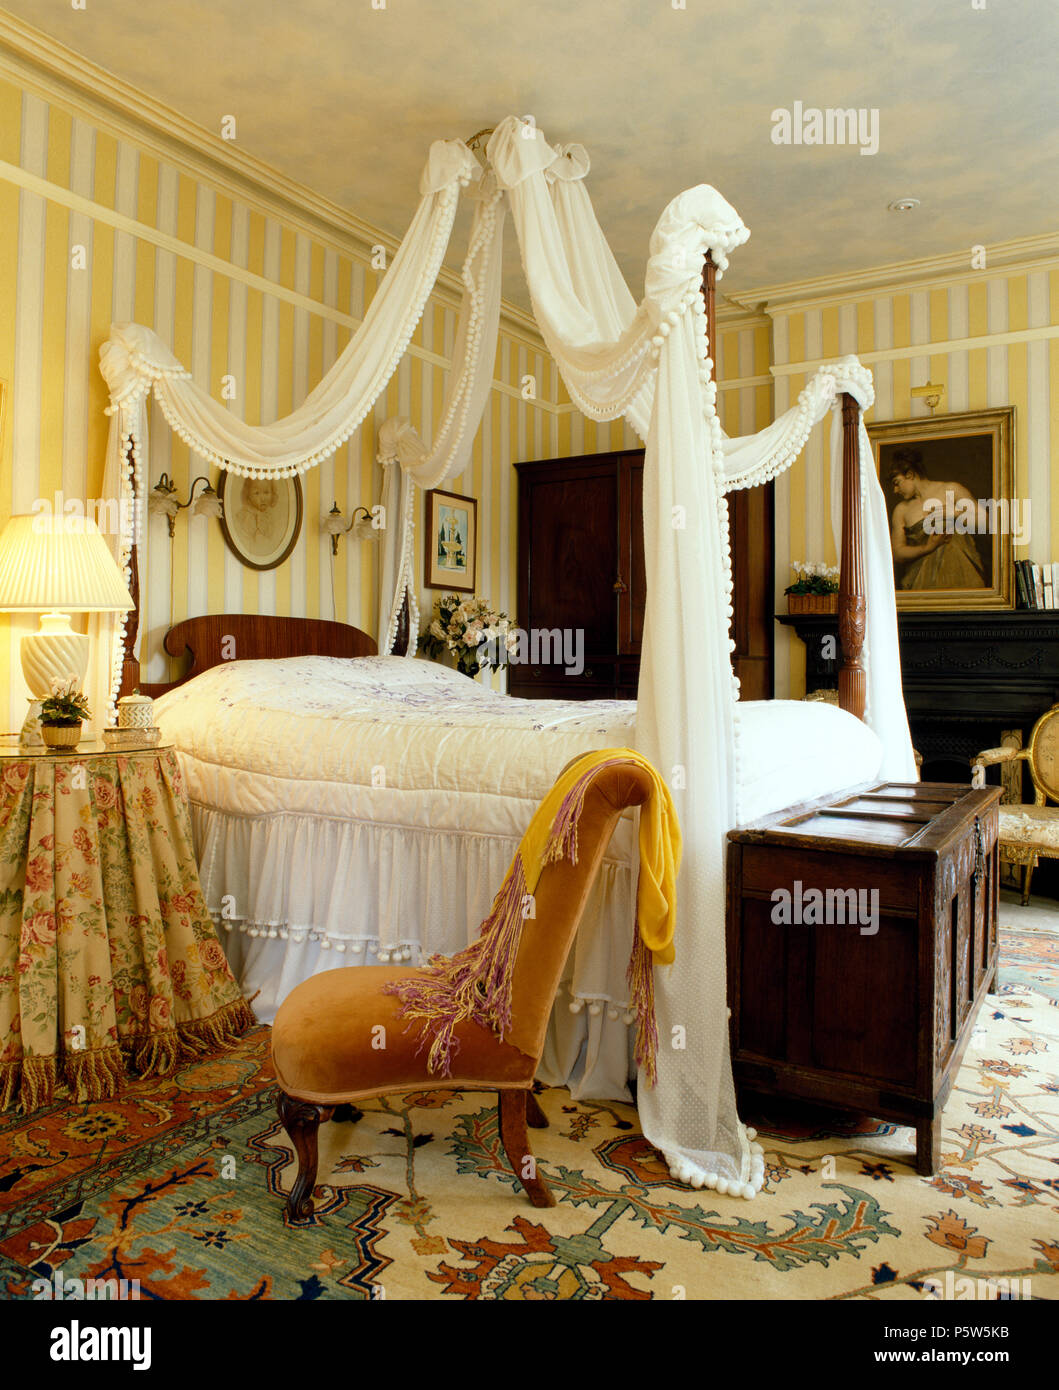 White voile drapes and valence on bed with spindle poles in bedroom with striped wallpaper and an antique chest Stock Photo